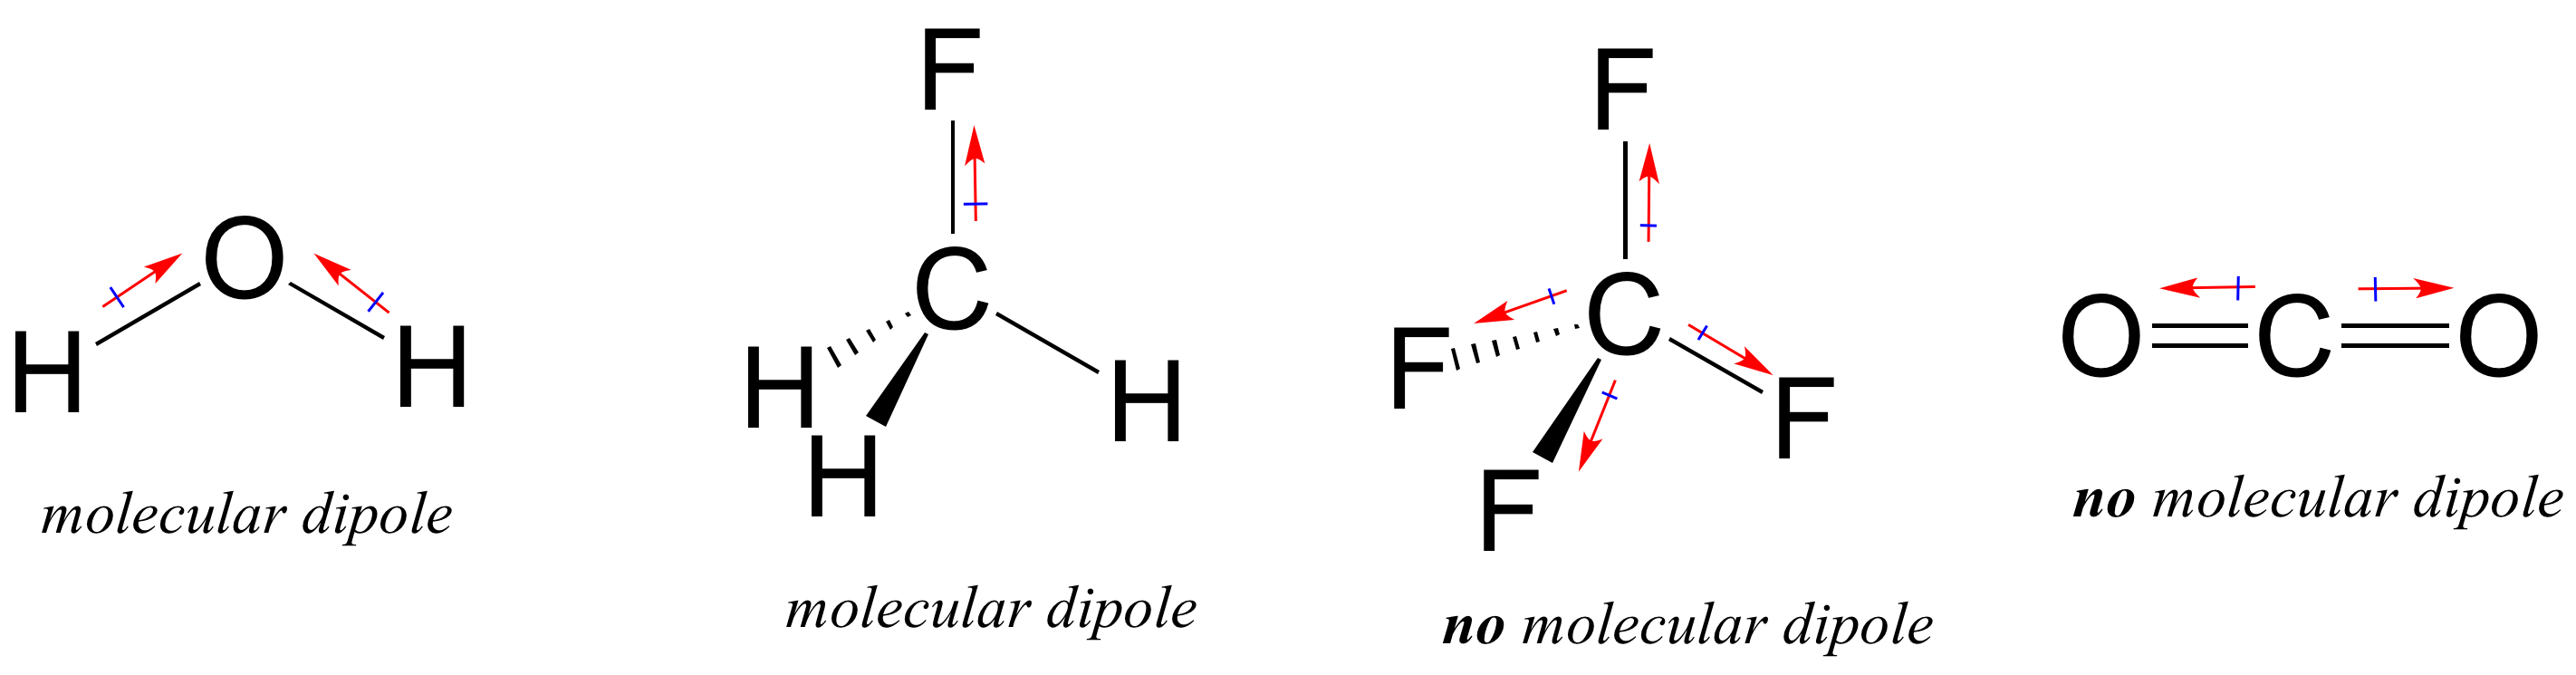 A set of structural formulas with bond dipoles indicated and each labeled as containing a molecular dipole or not. In order: H2O, water, shown with 2 bond dipoles and a molecular dipole. Second, fluoromethane, shown with one bond dipole and a molecular dipole. Third, tetrafluoromethane, with 4 bond dipoles in opposing directions and thus no molecular dipole. Finally, carbon dioxide, with 2 bond dipoles in opposing directions and thus no molecular dipole.